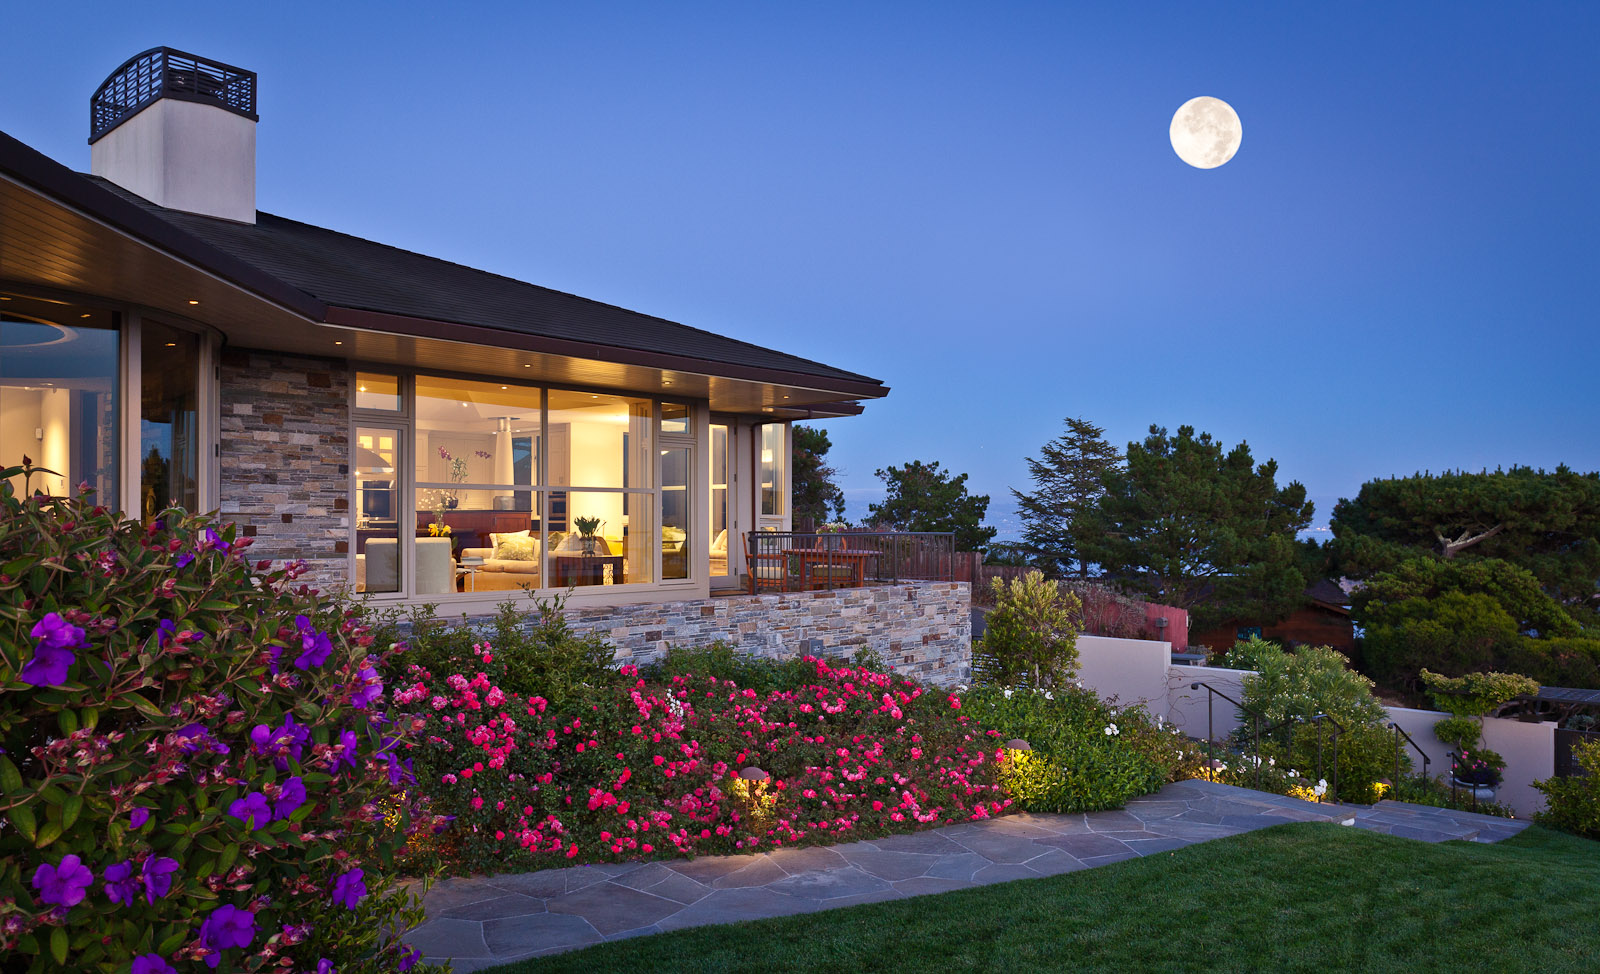 Tiburon home high on the hill with a view to Angel Island and San Francisco. Full moon rising over the horizon. Residence designed by Sutton Suzuki Architects. Photo by Jay Graham